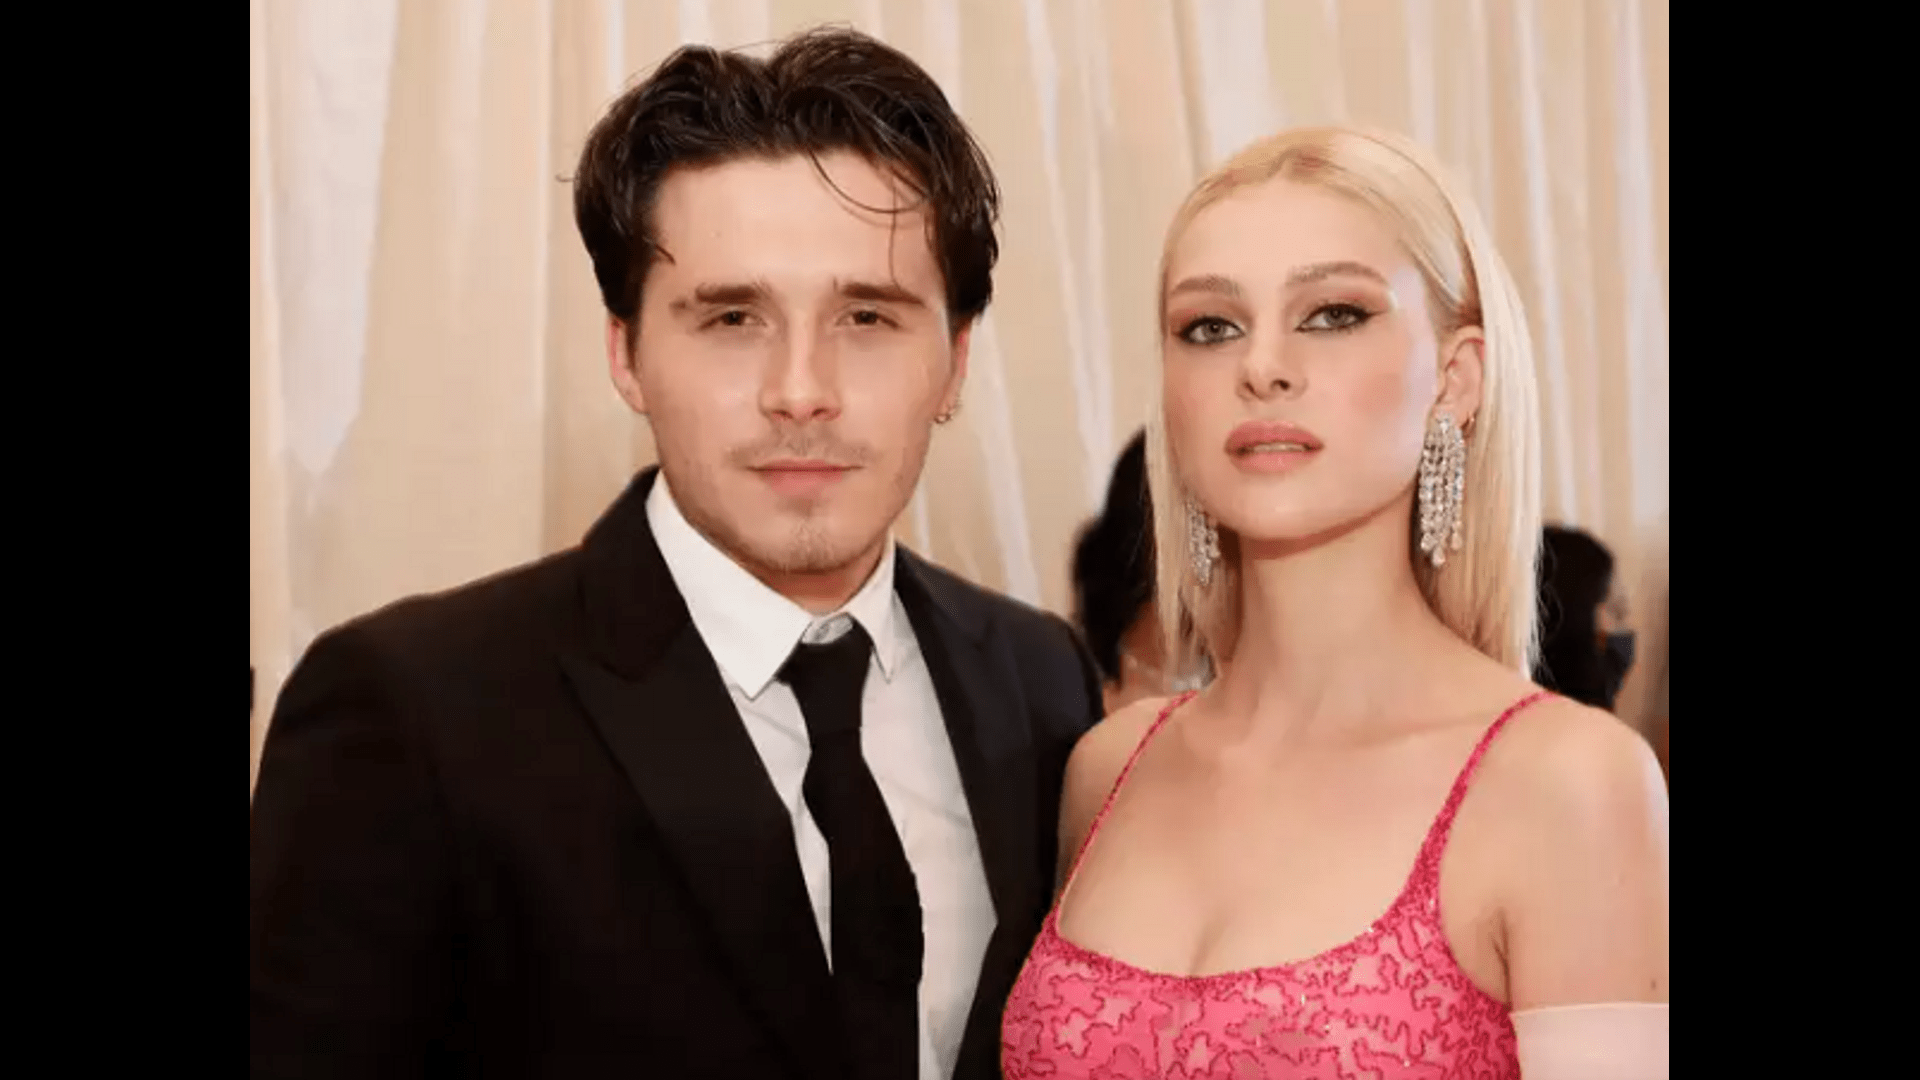 nicola-peltz-and-brooklyn-beckham-share-the-only-photo-from-their-wedding